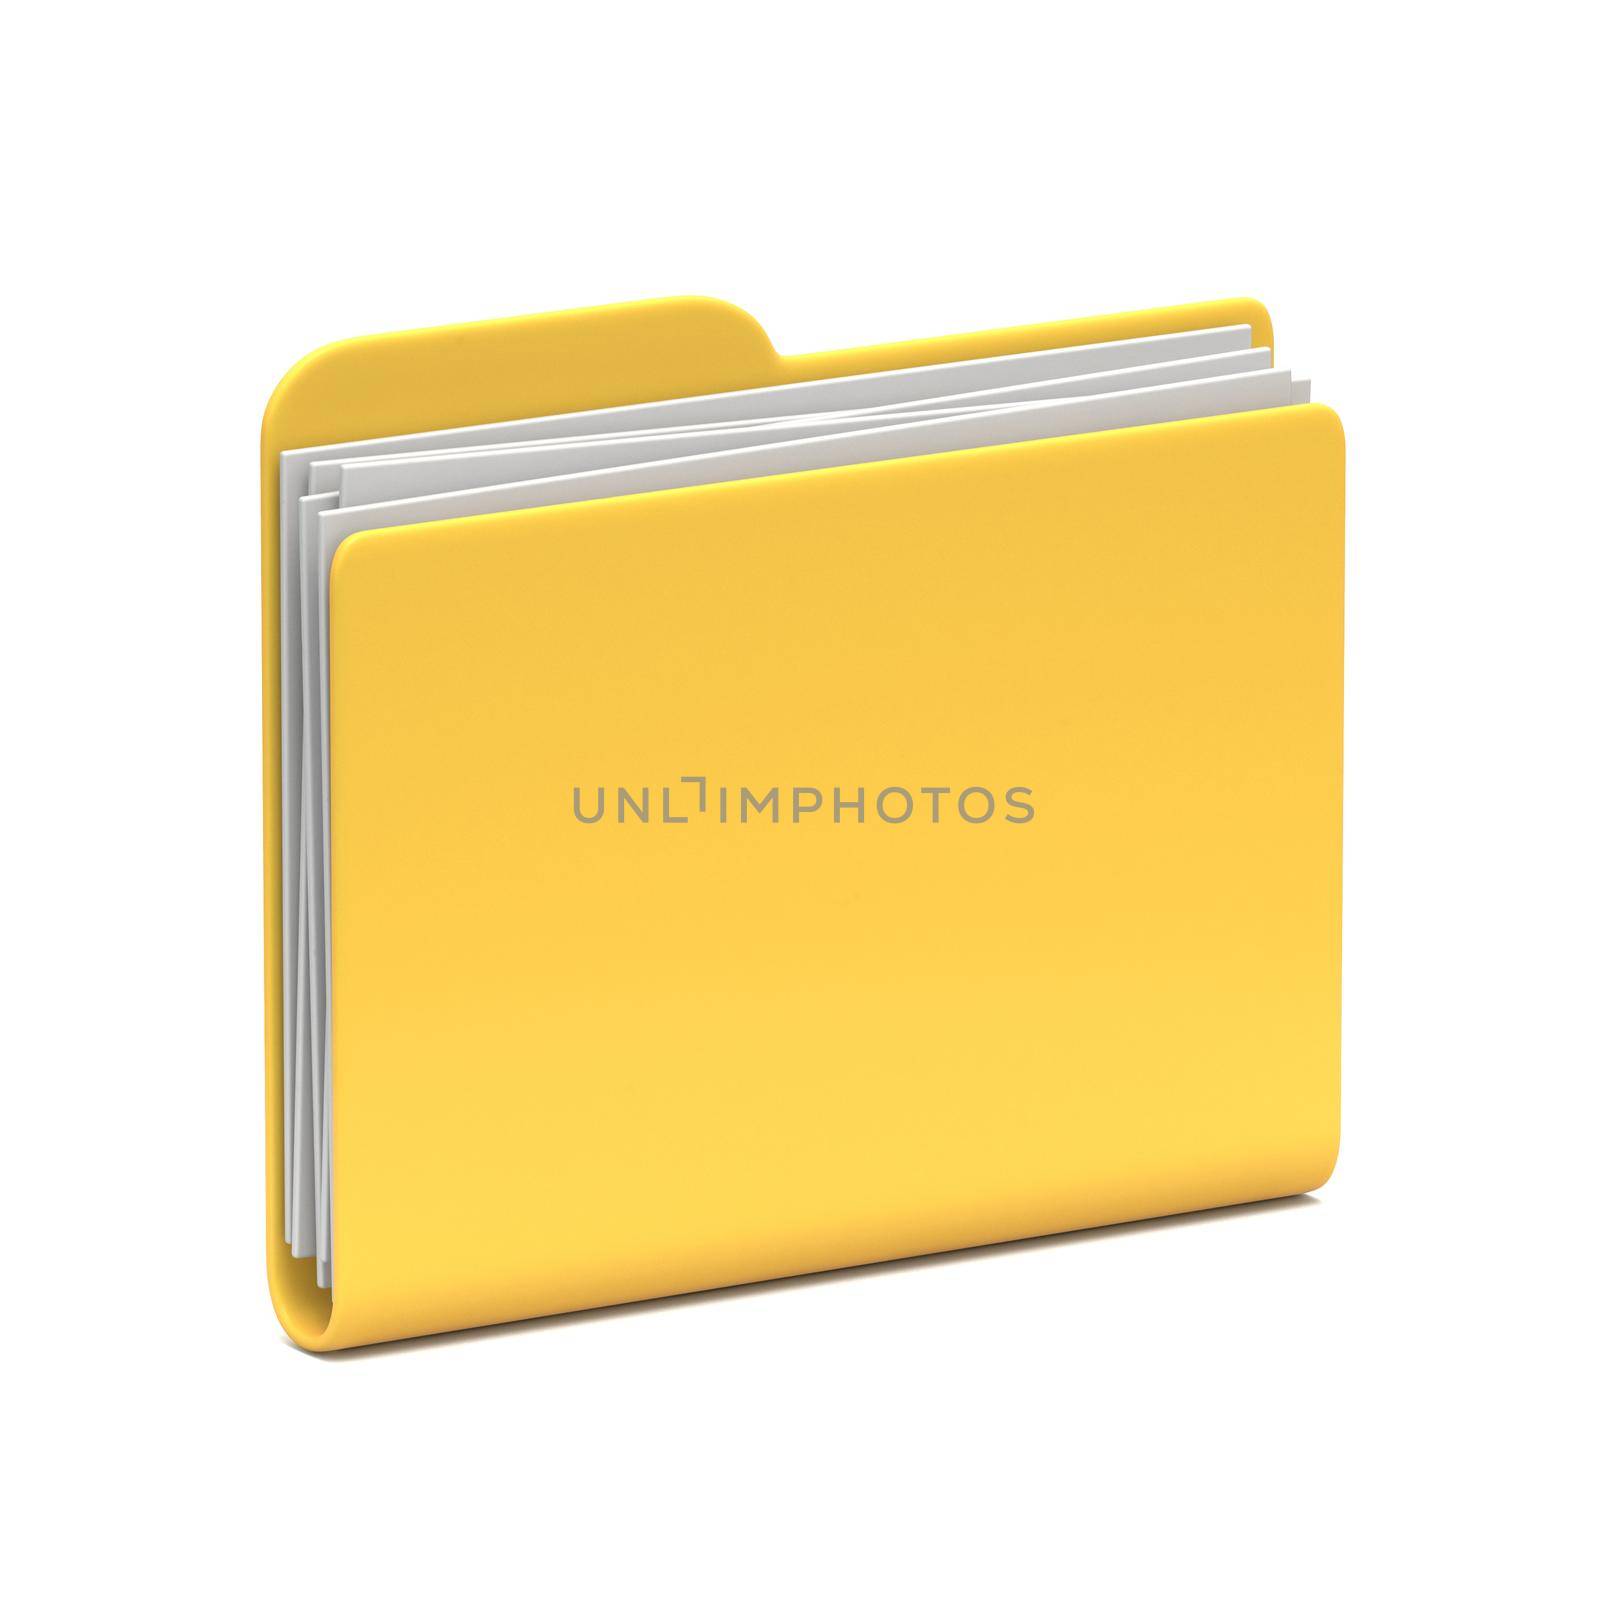 Yellow folder icon closed 3D rendering illustration isolated on white background